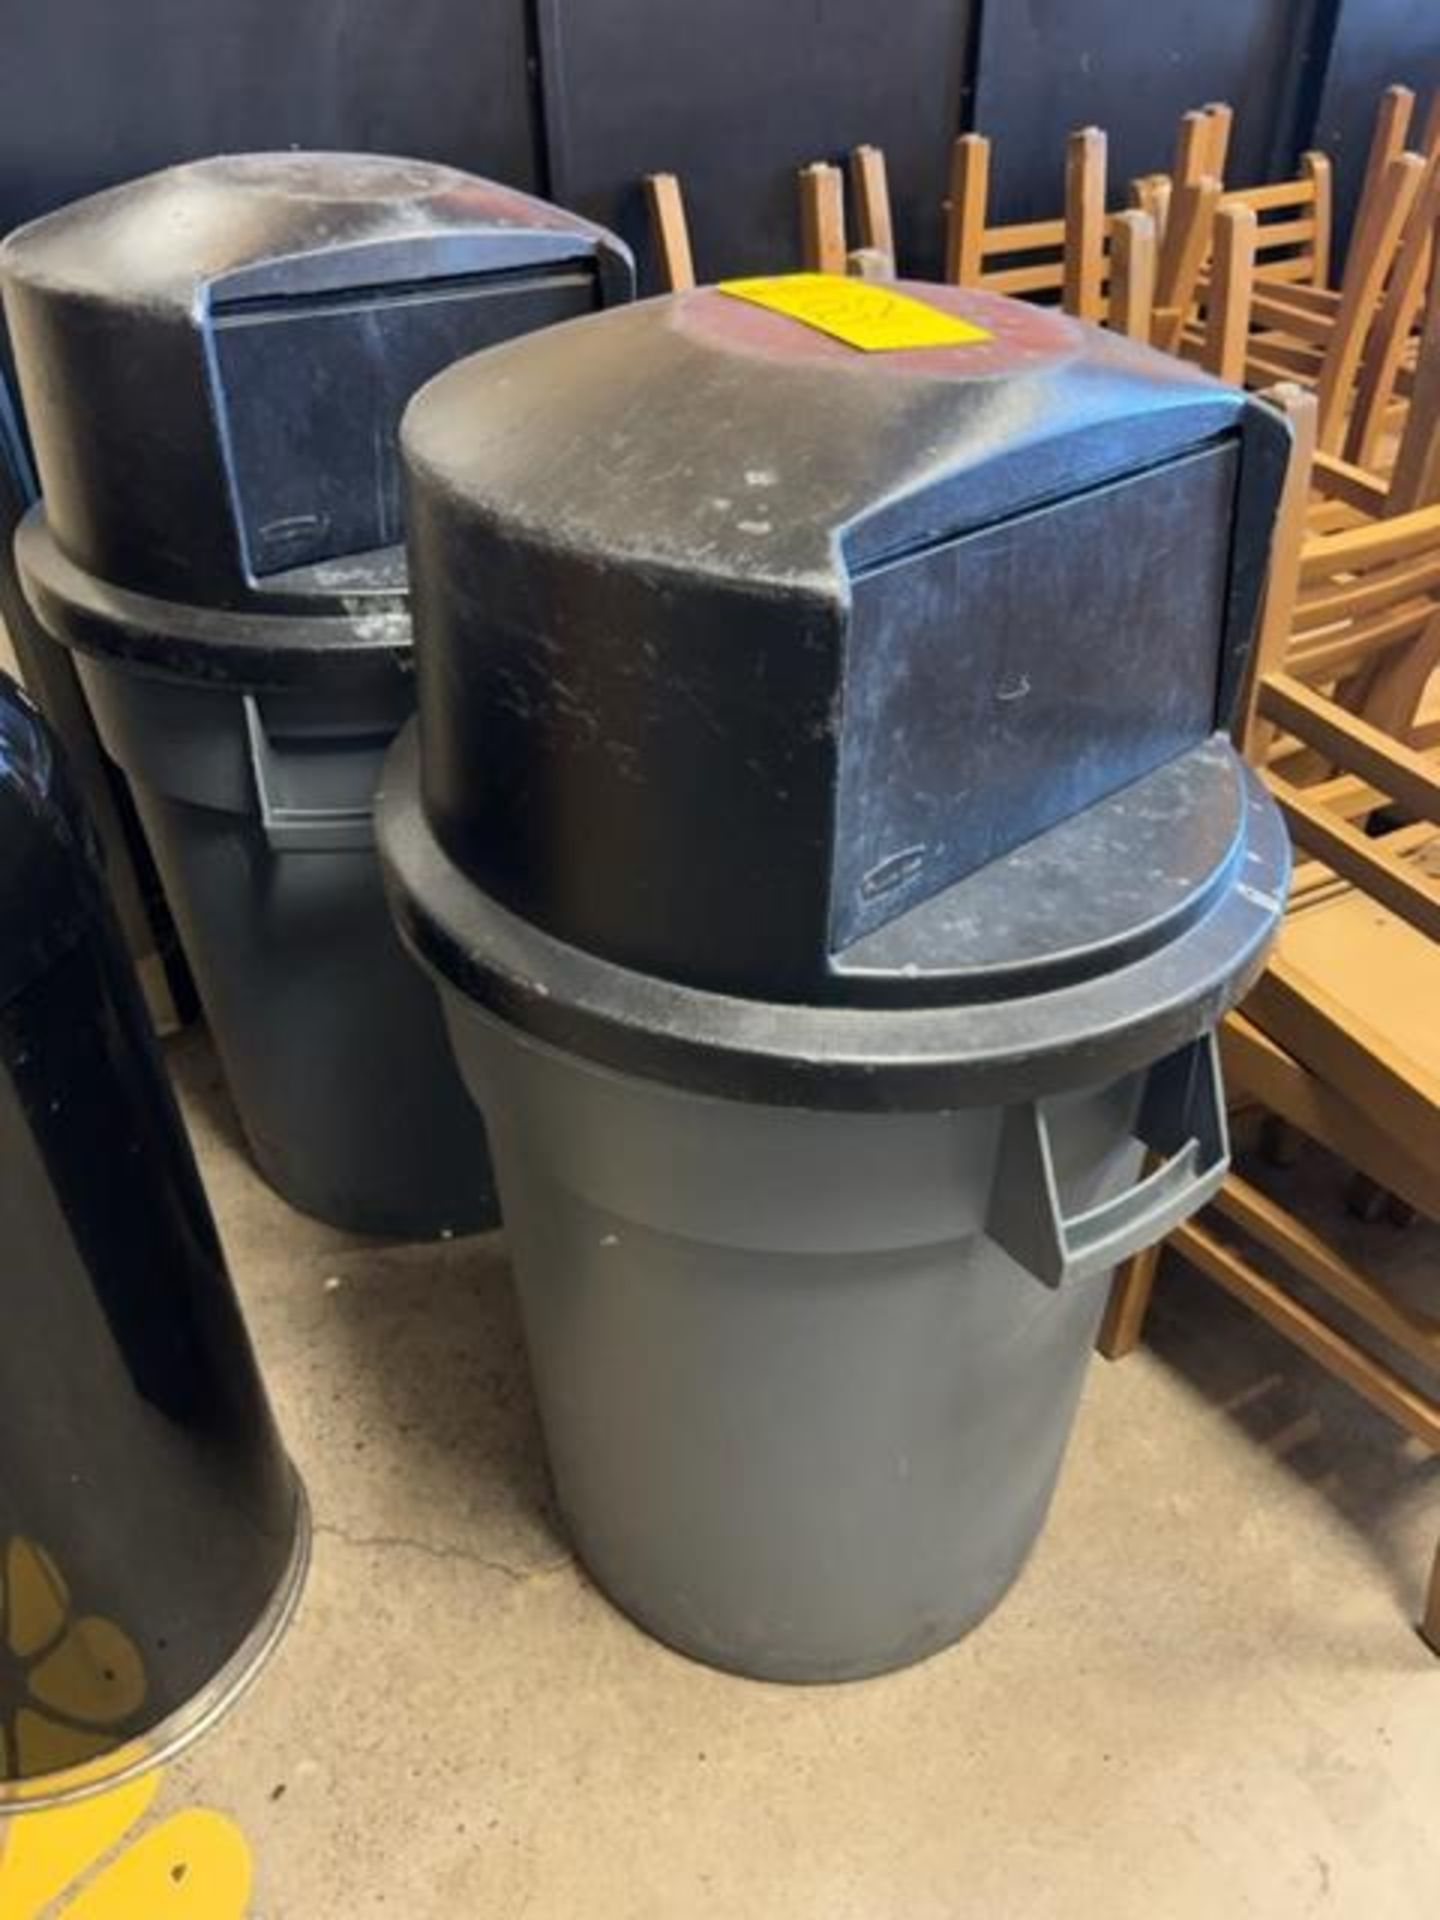 (2) Rubbermaid Garbage Cans